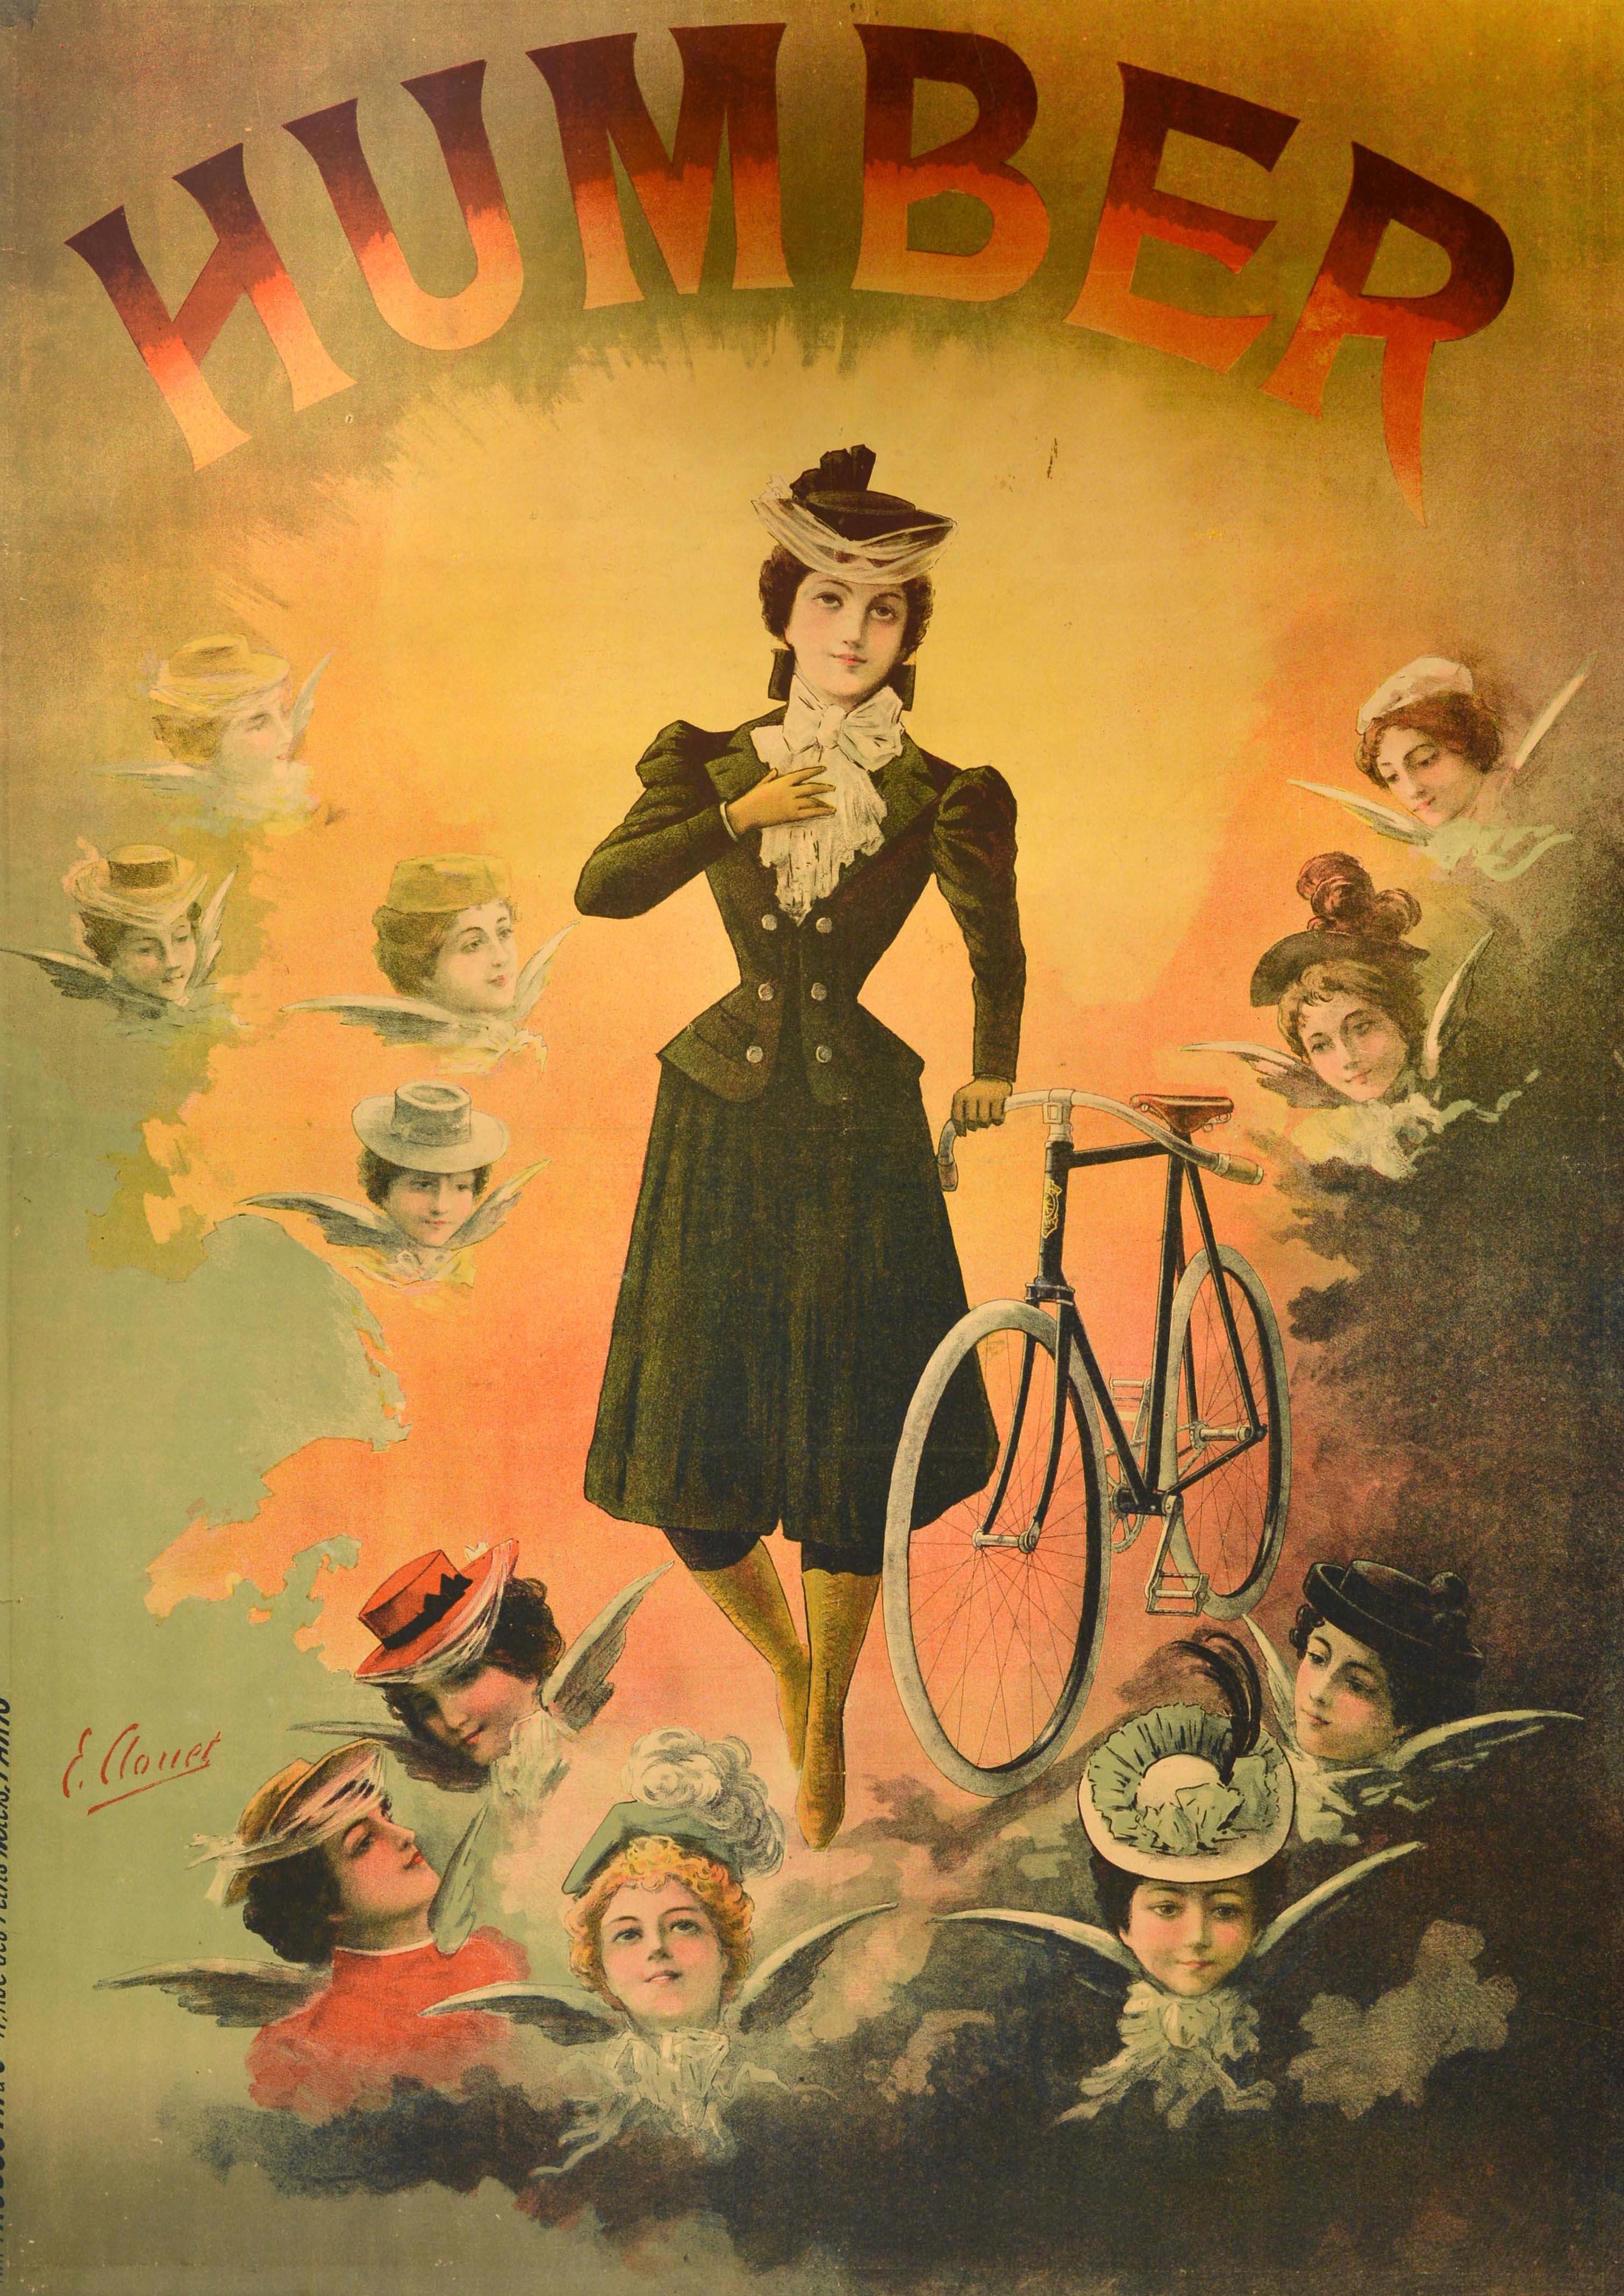 Original antique advertising poster for Humber bicycles featuring a heavenly illustration of a fashionably dressed lady with a bicycle lit up from the shining sun behind her and the faces of ladies as angels with wings in the clouds around her, the